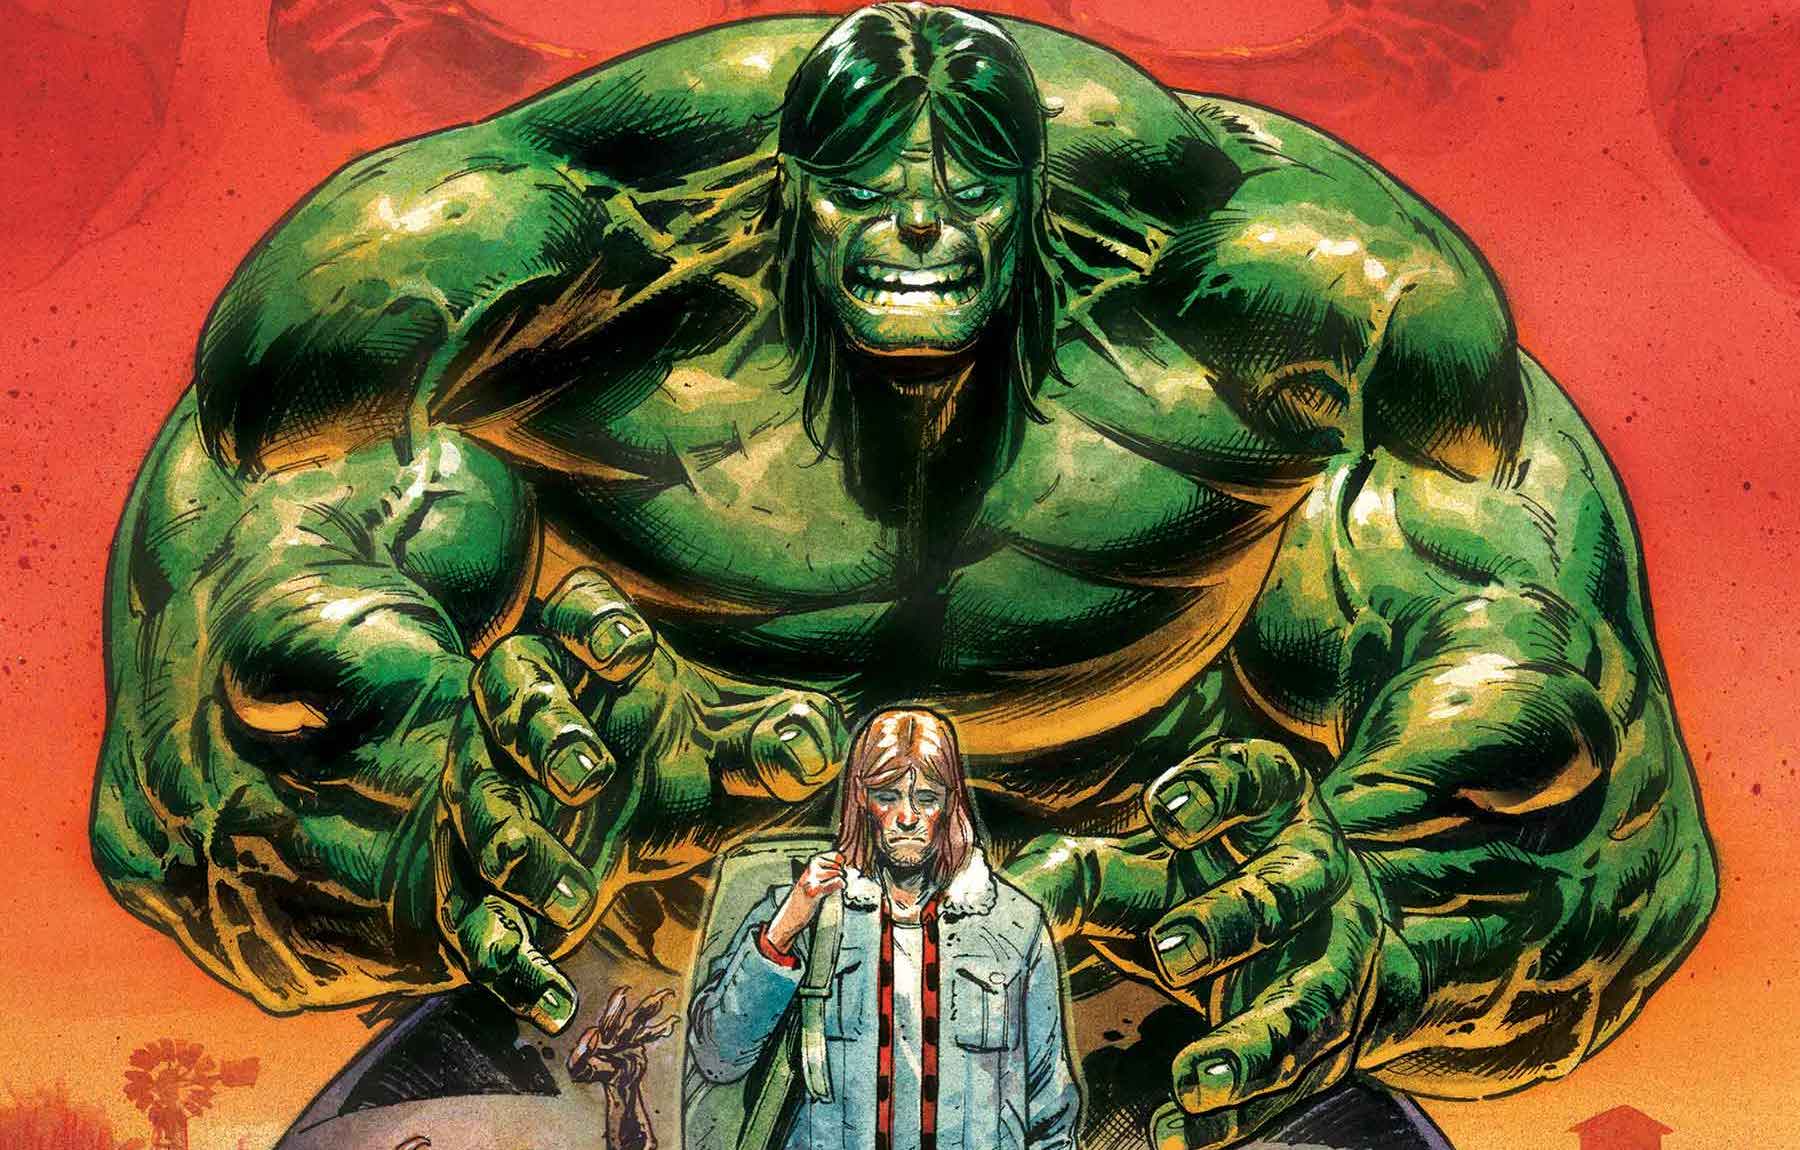 EXCLUSIVE Marvel Preview: The Incredible Hulk #1